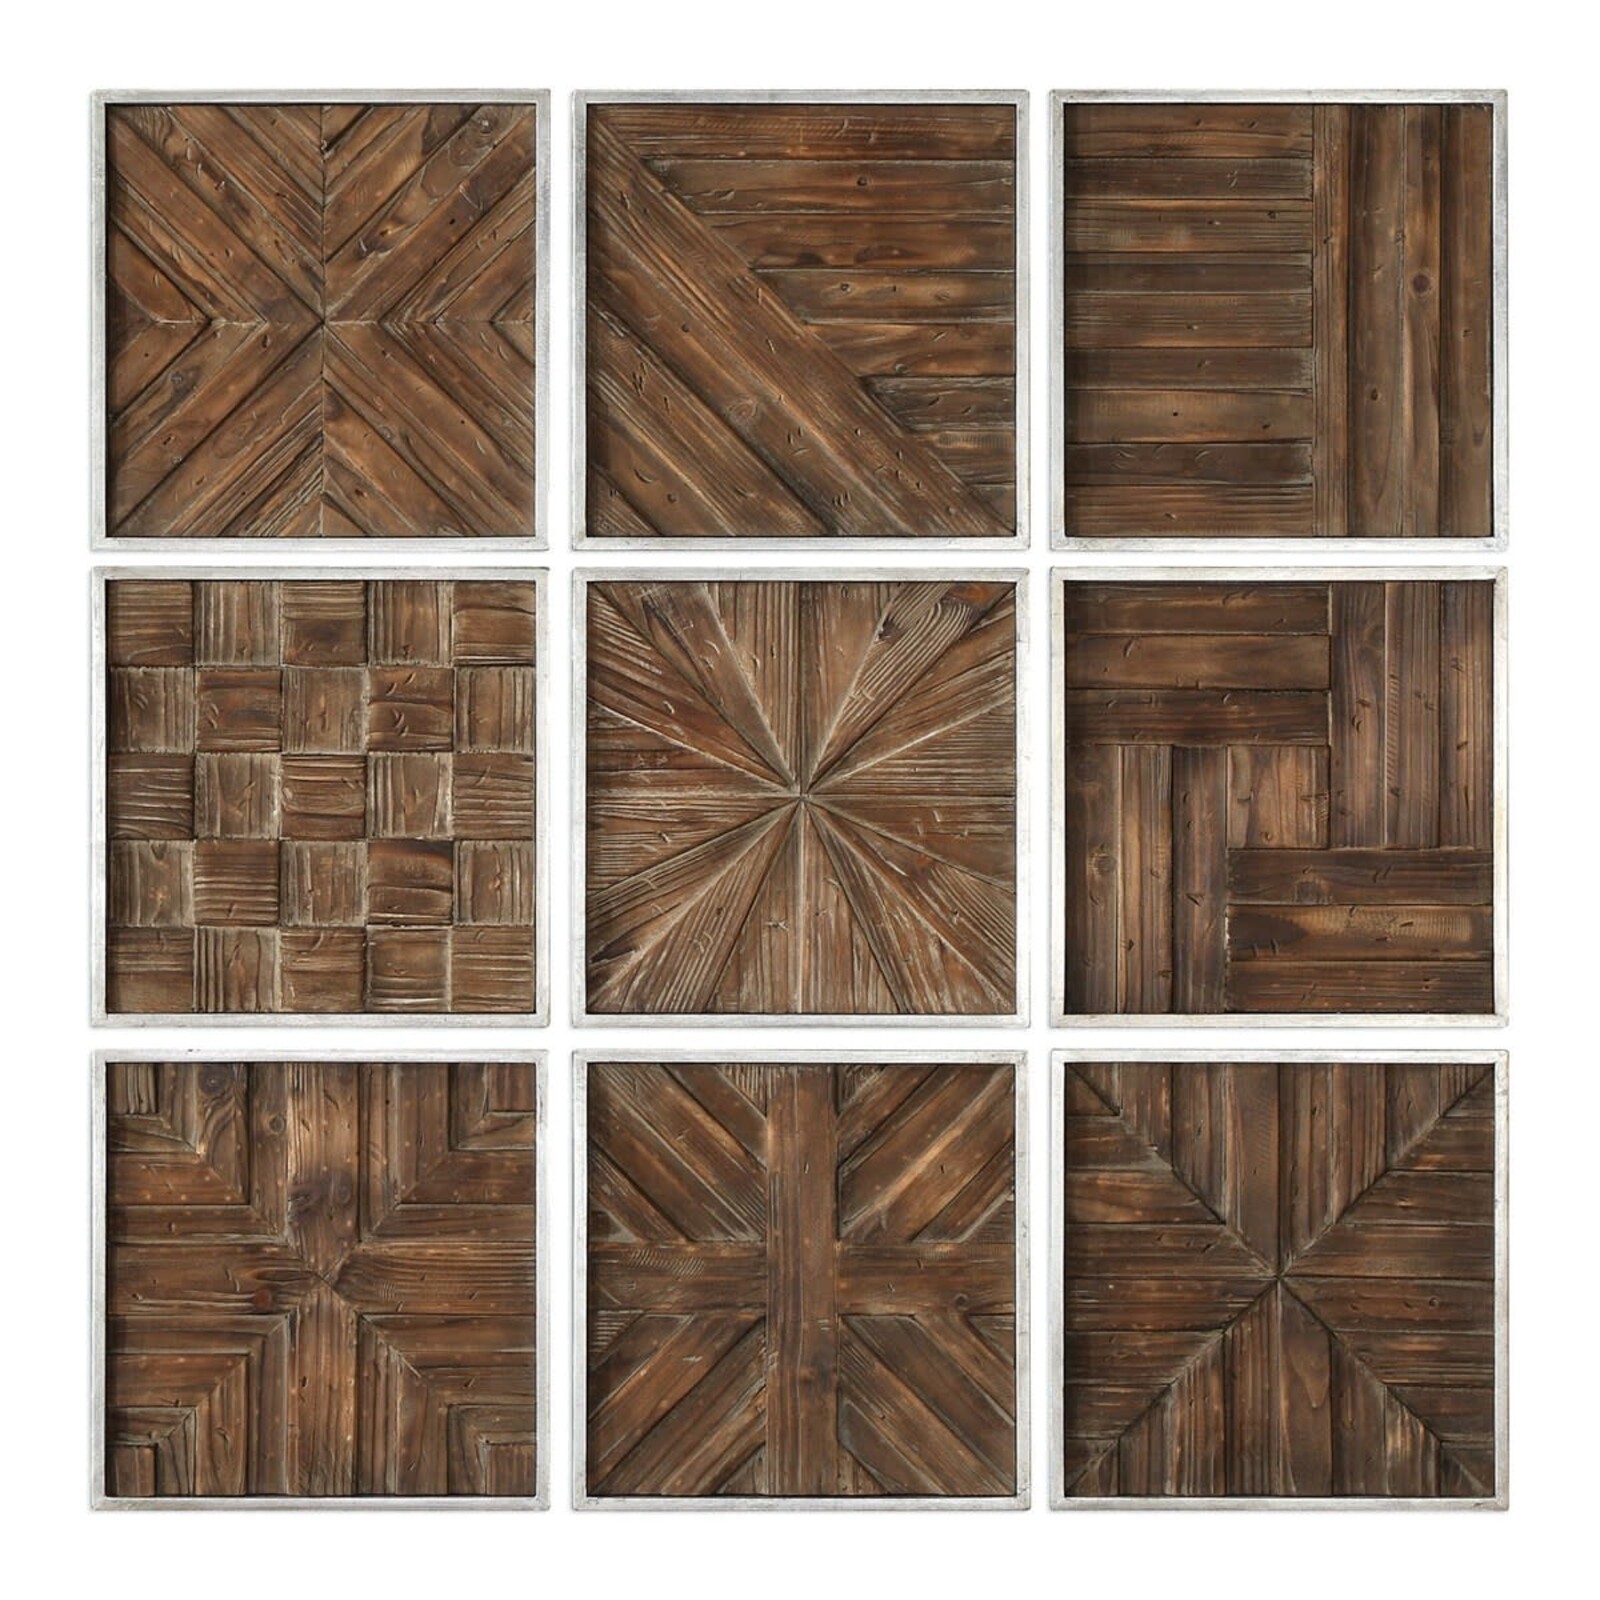 Uttermost BRYNDLE SQUARES WOOD WALL DECOR 04115  SET OF 9 loading=